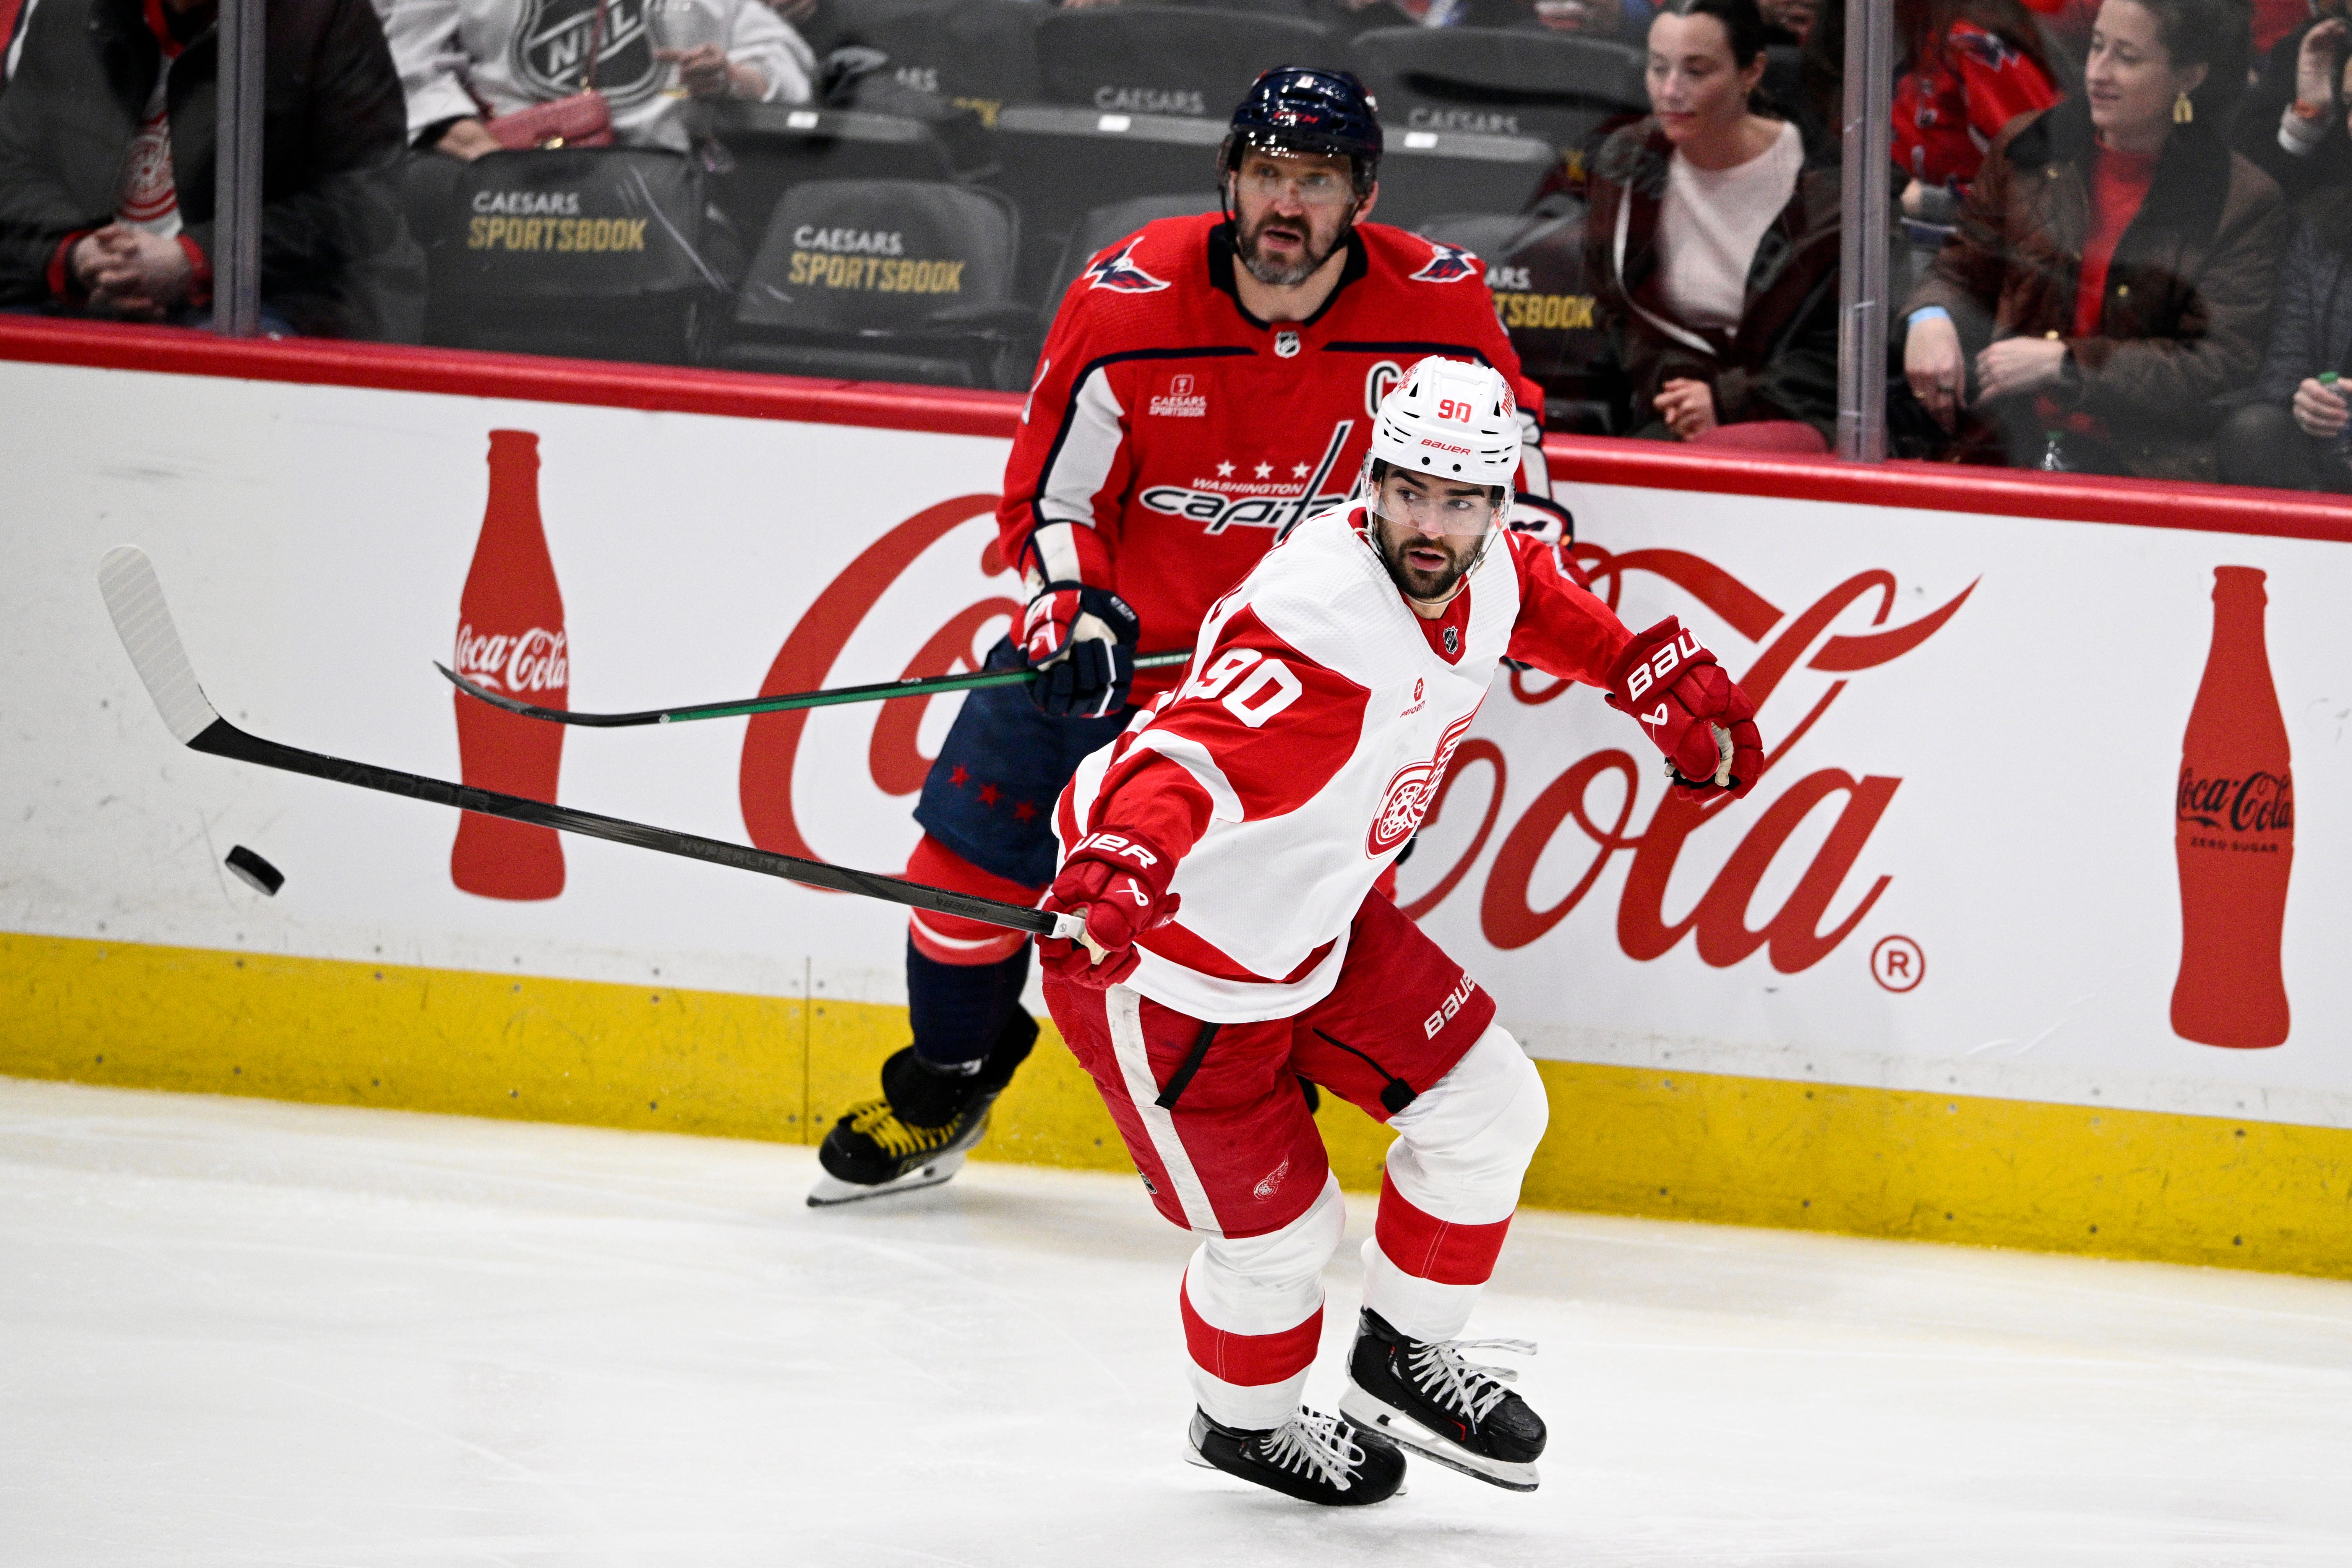 Detroit Red Wings center Joe Veleno (90) reaches for the puck in front of Washington Capitals left wing Alex Ovechkin (8) during the third period.